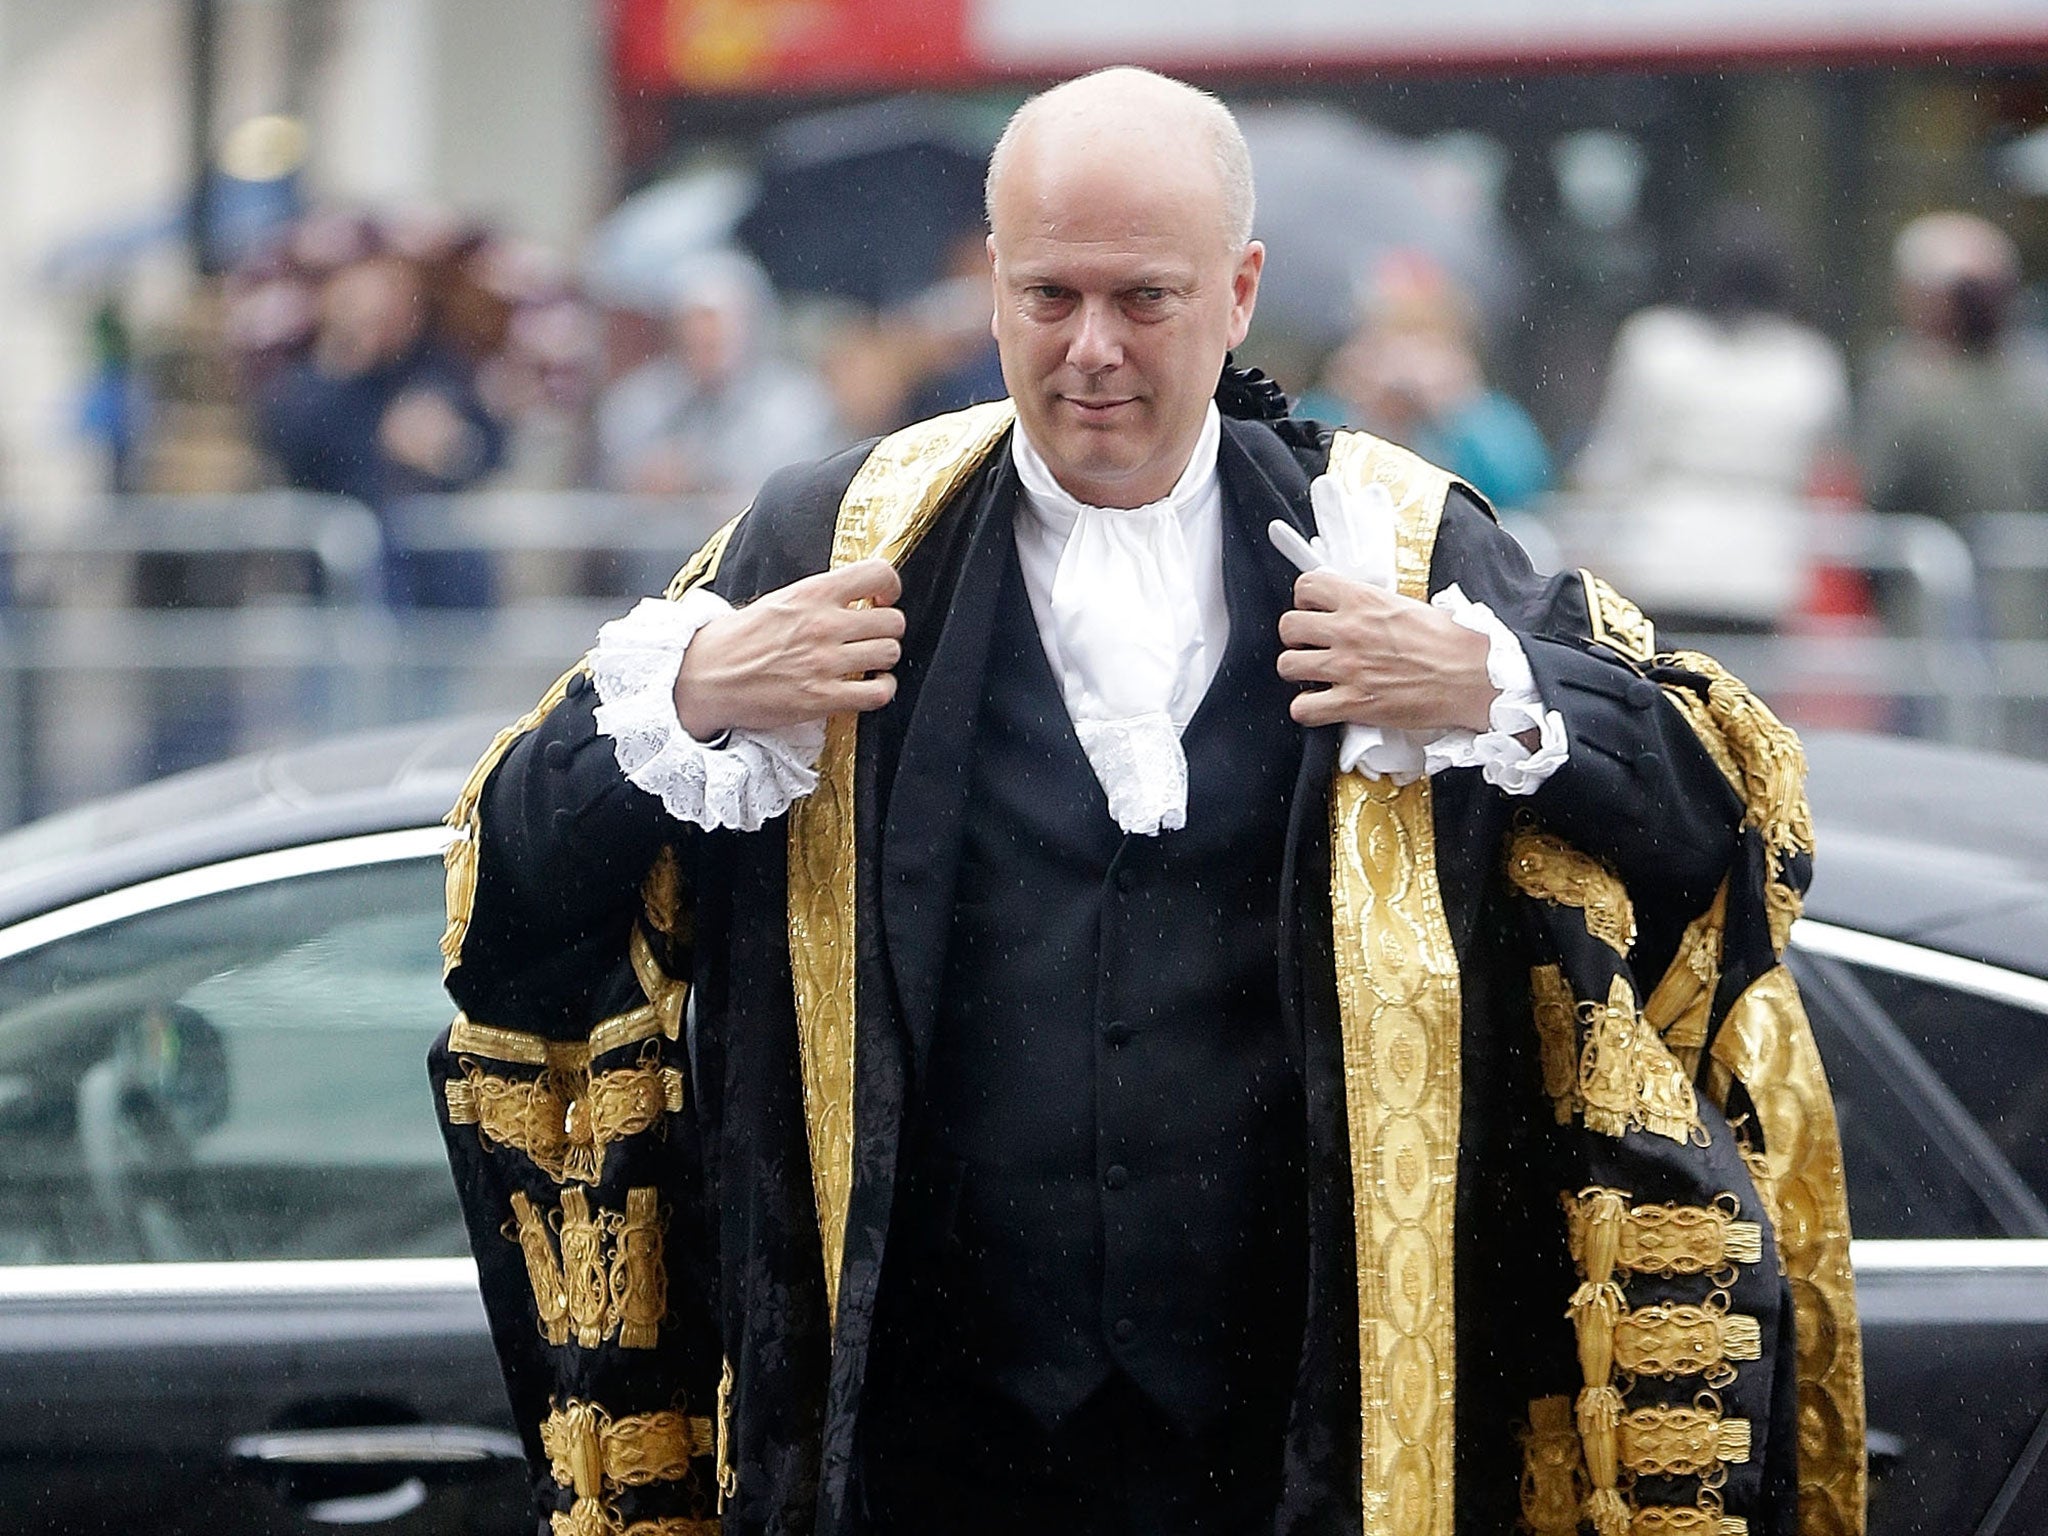 Chris Grayling made some disastrous policy decisions as Justice Secretary